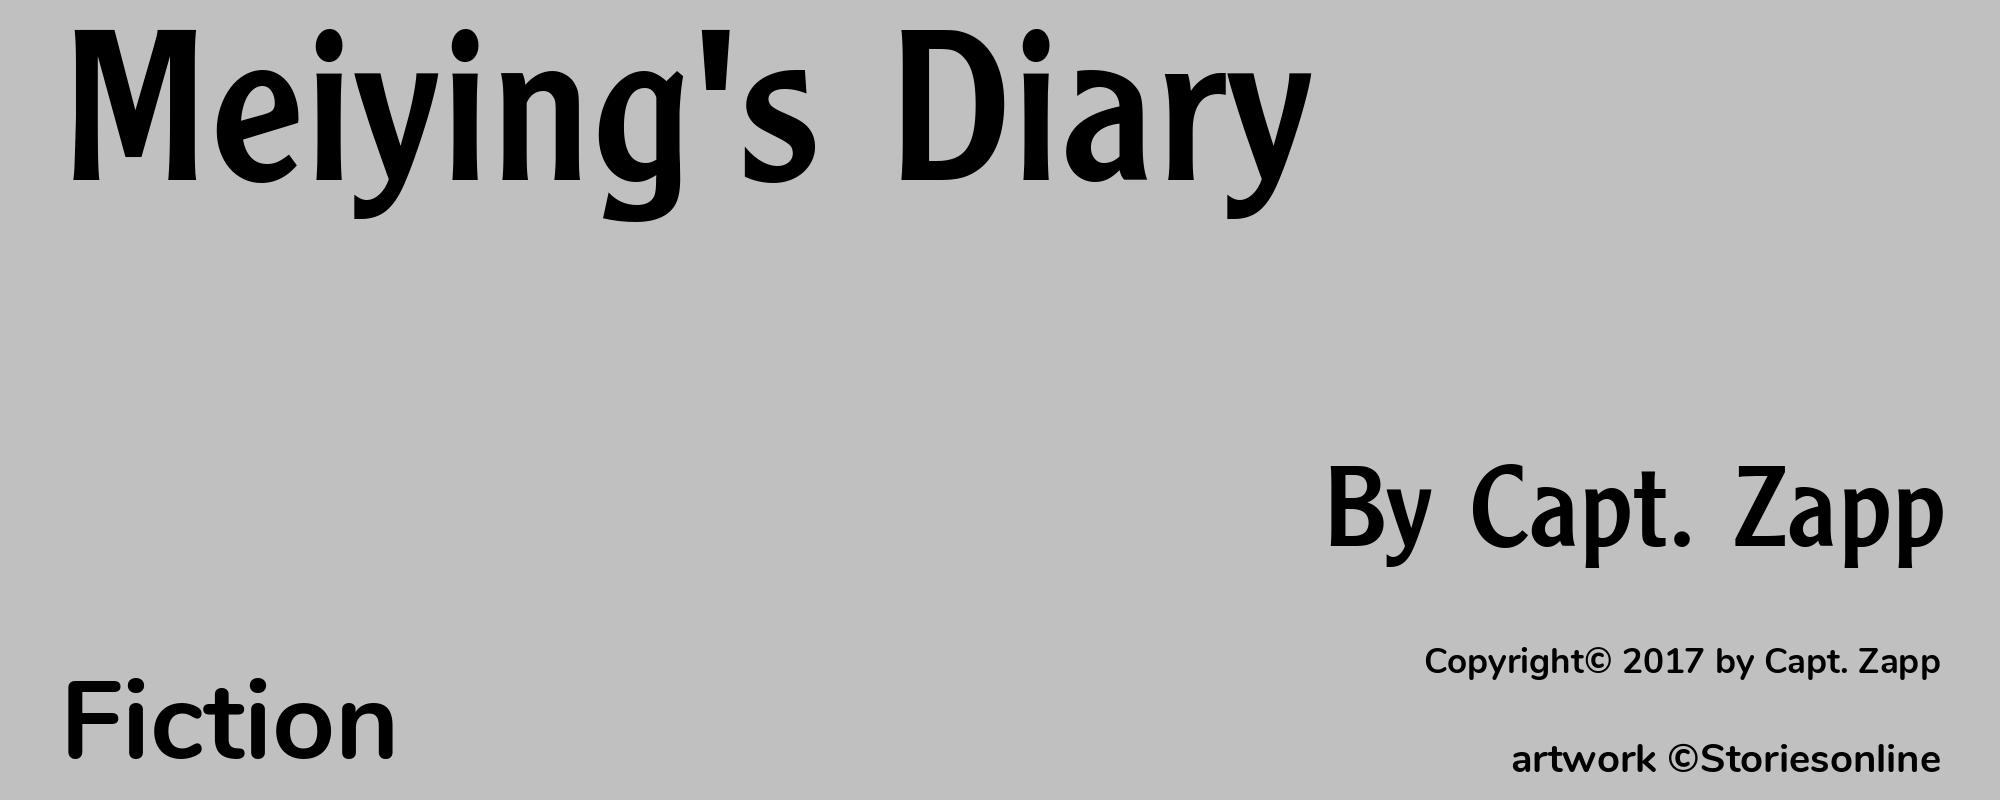 Meiying's Diary - Cover